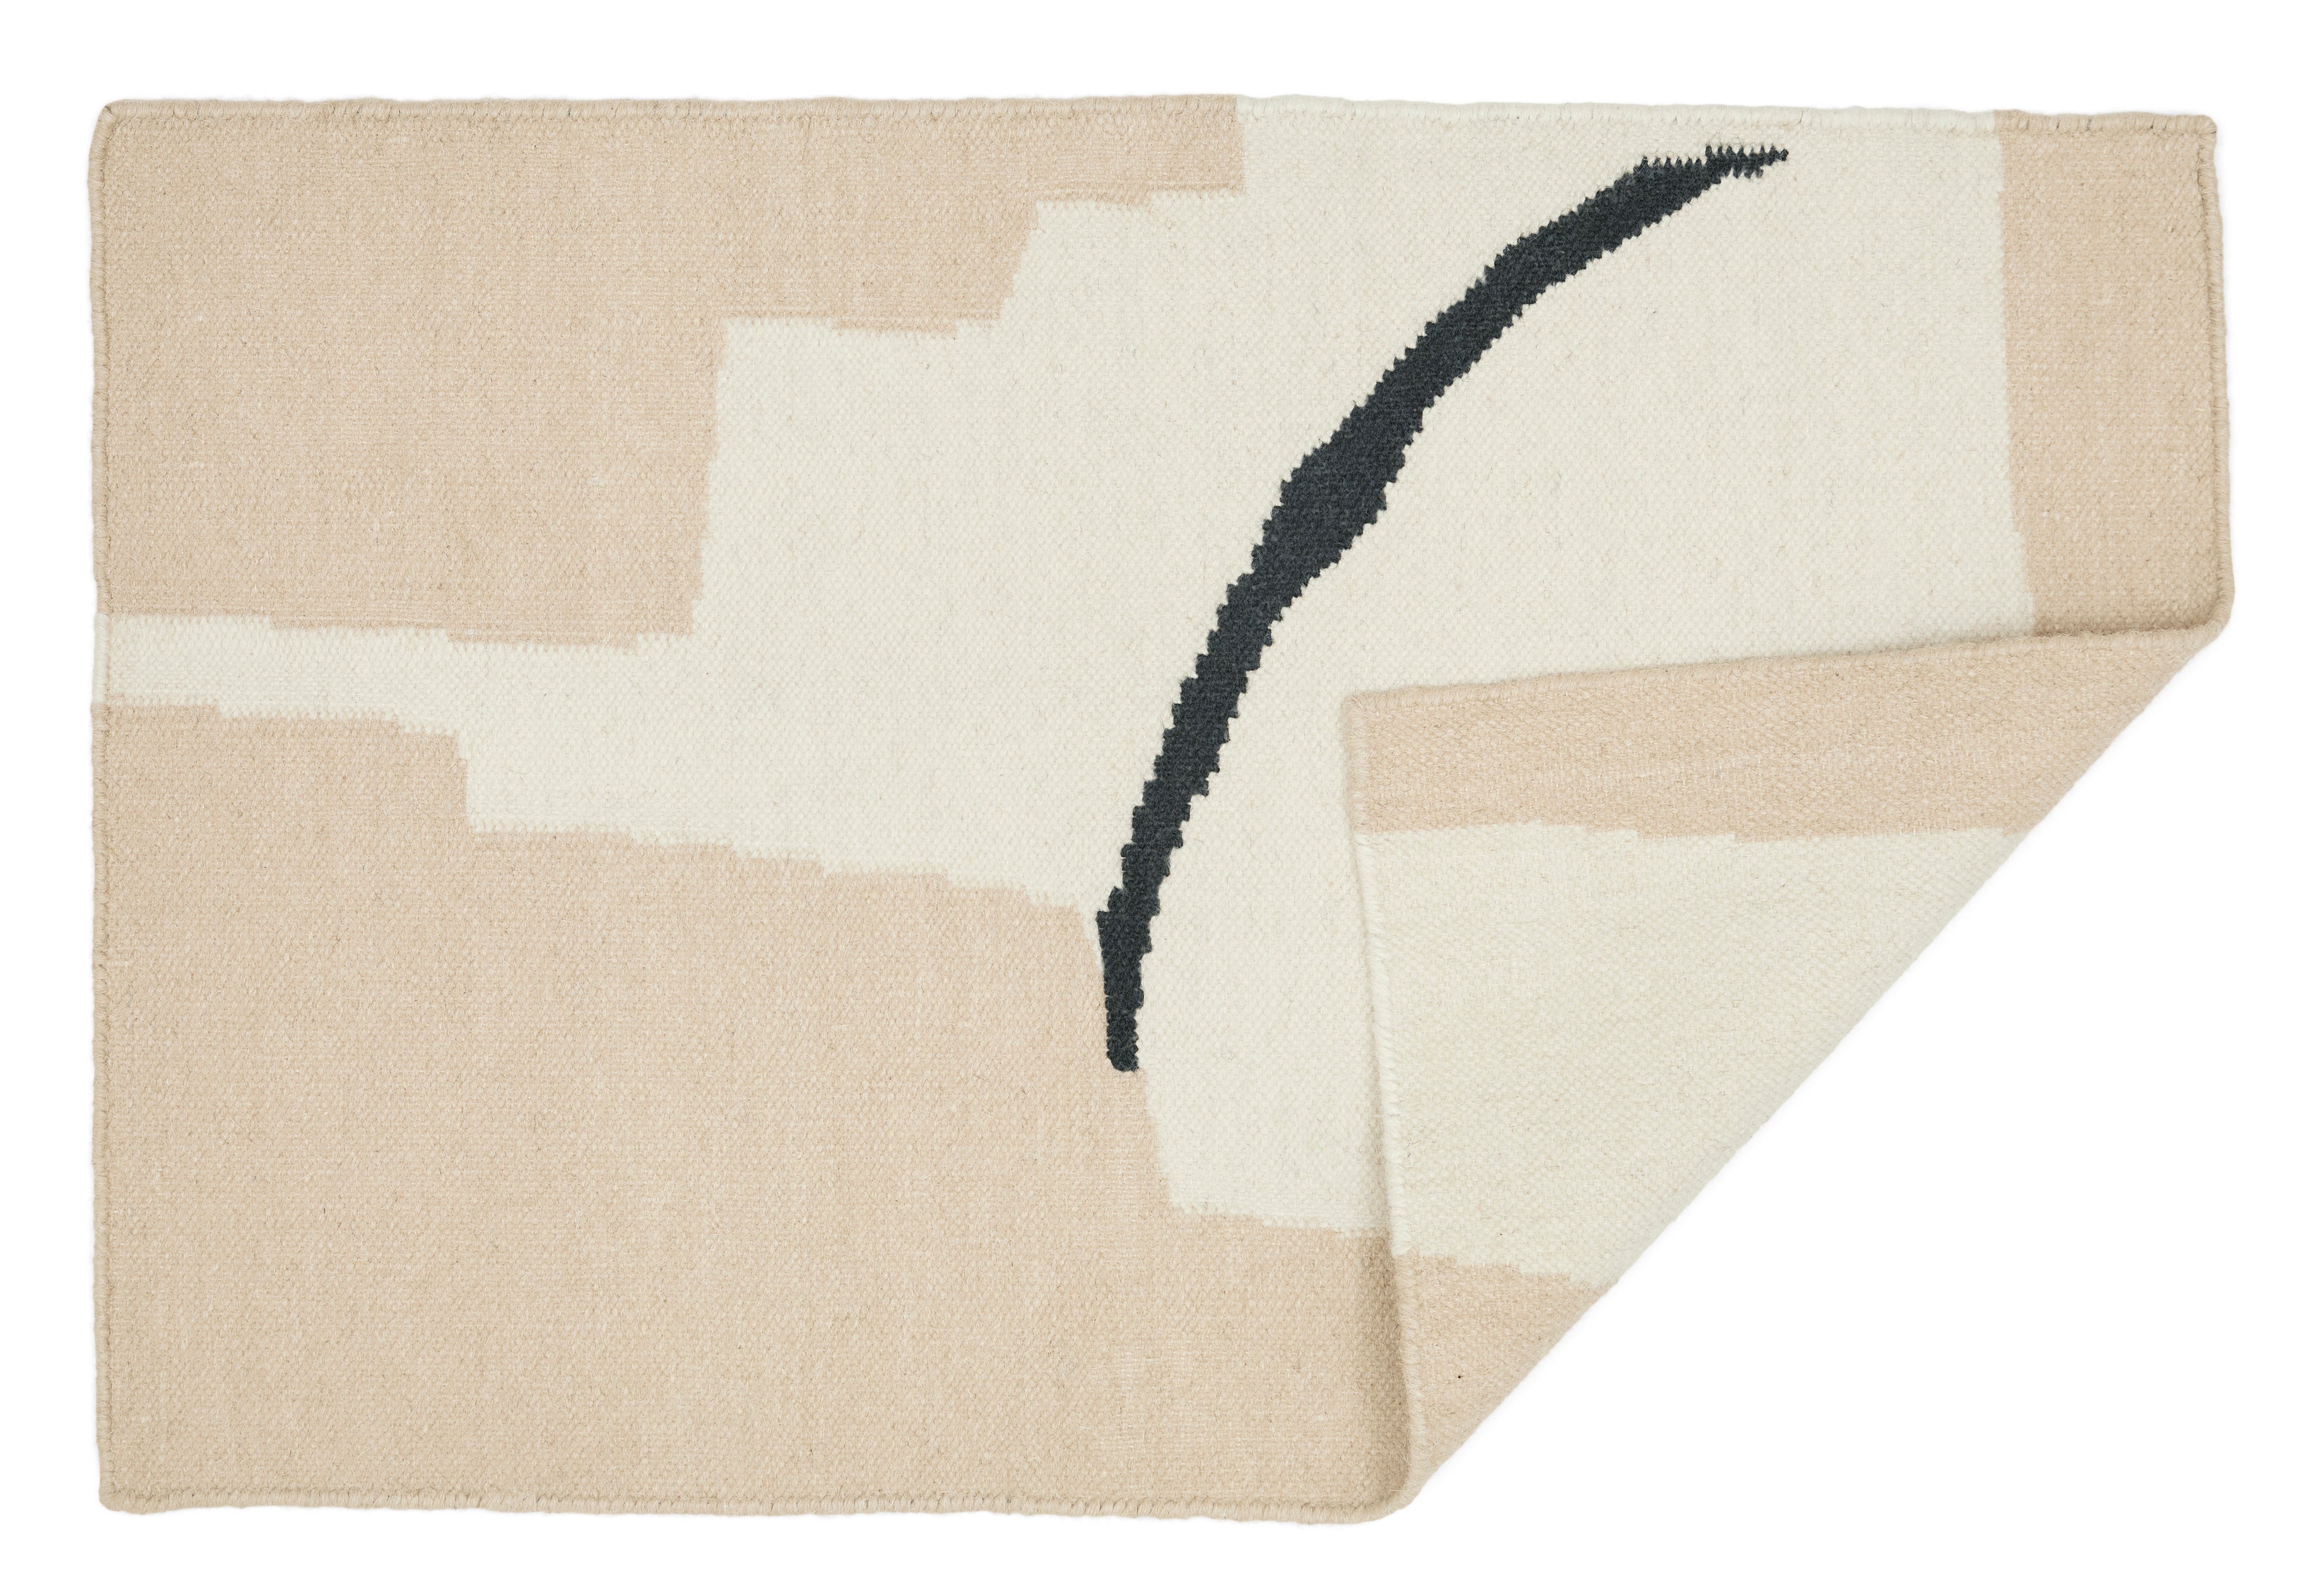 A 100% wool yarn flat weave rug from Cold Picnic. An abstract design featuring cream with tan and black. Available in sizes 2x3' 4x6', 6x9'.